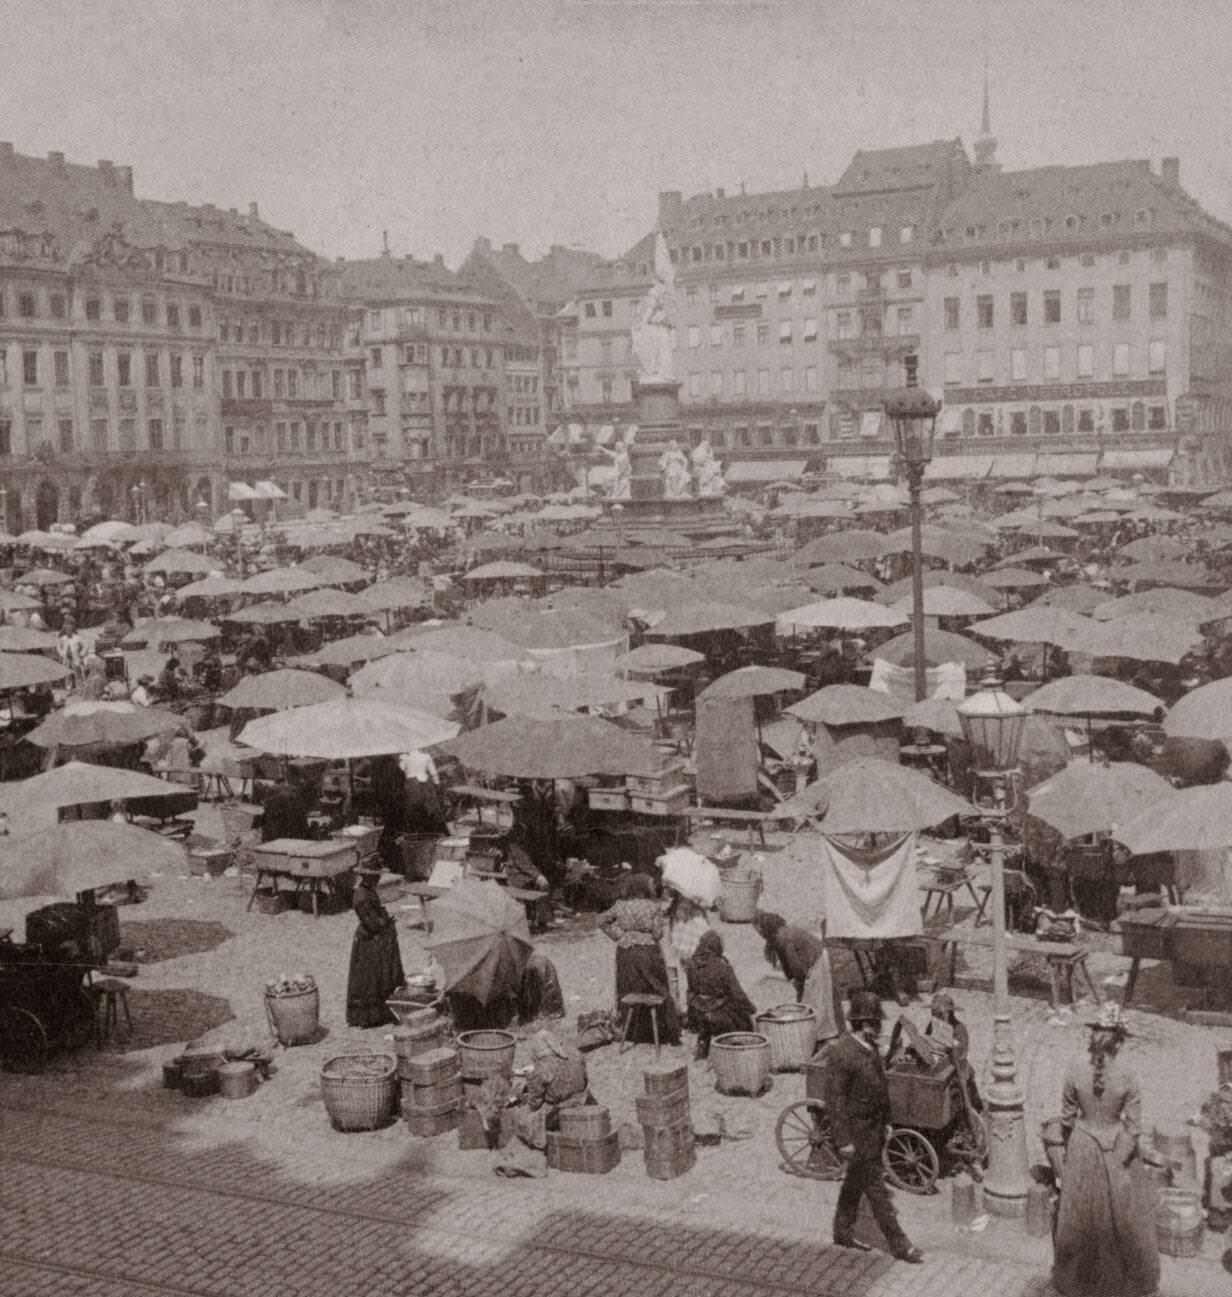 Vintage photo of market day in Dresden. Germany. 1900s